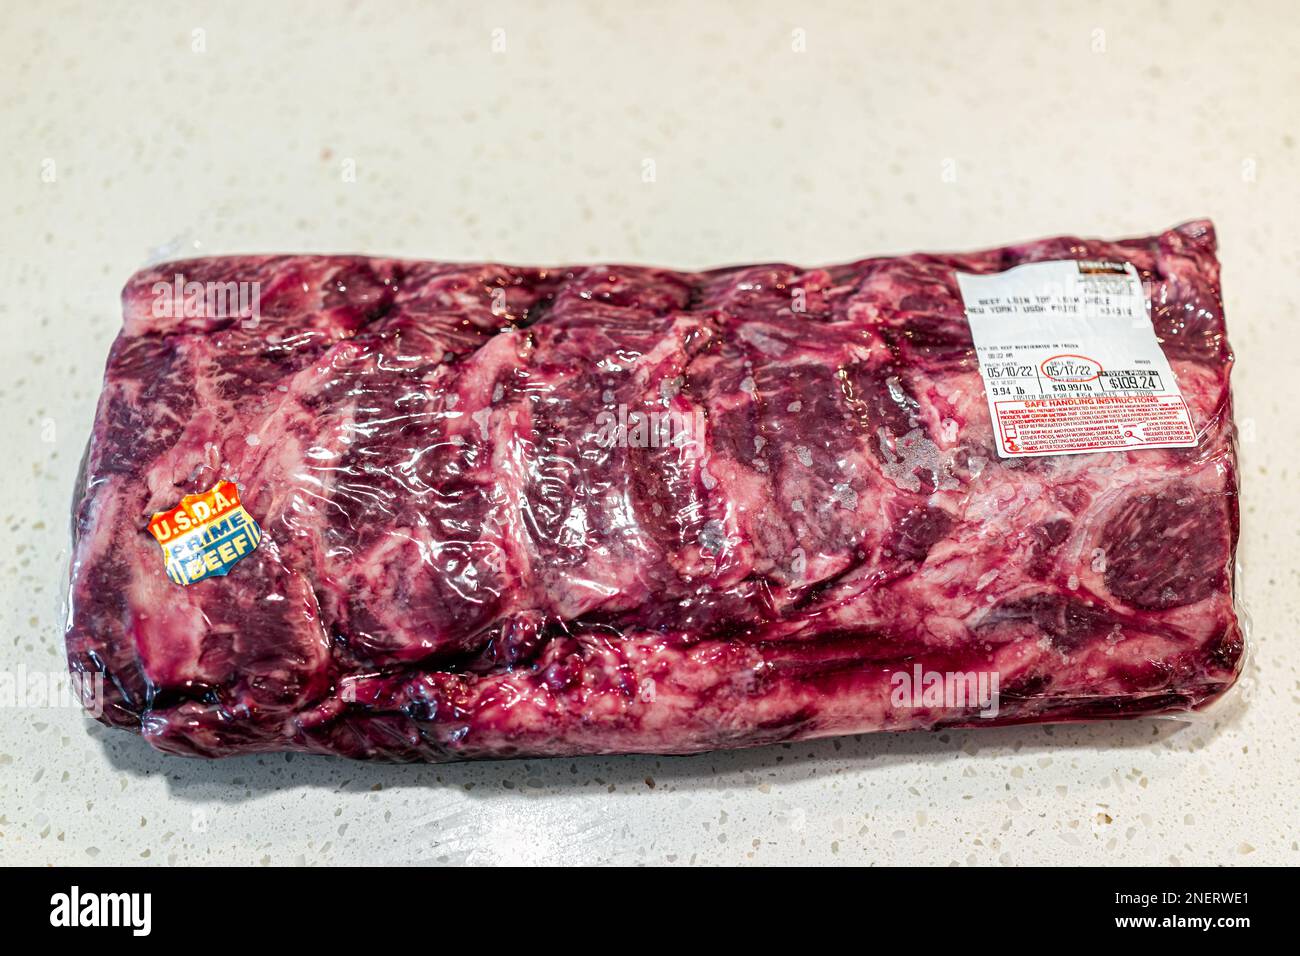 Naples, USA - May 11, 2022: Prime beef top loin sirloin meat steak as whole packaged roast New York strip steak by Costco Kirkland brand with price st Stock Photo